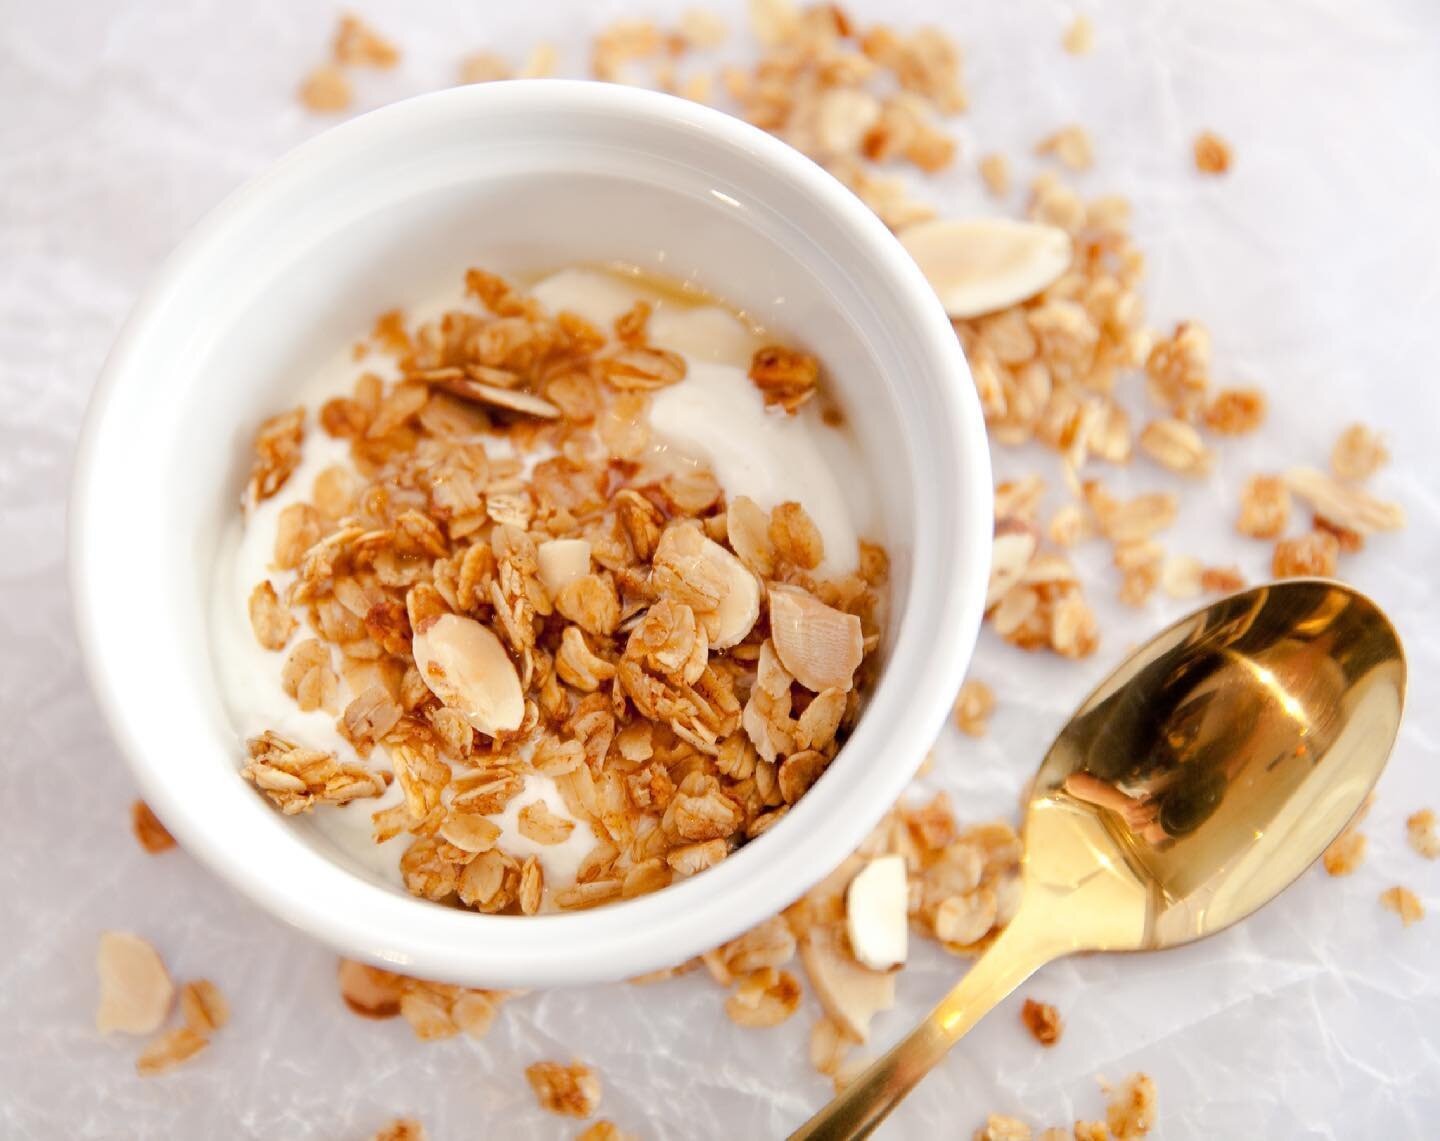 &bull;&bull;Almond Maple Granola&bull;&bull;
This granola is such a great staple to have in your pantry! I eat it almost every morning with my homemade yogurt. It&rsquo;s not too sweet (like I feel like some granola is), easy to make, and is SO much 